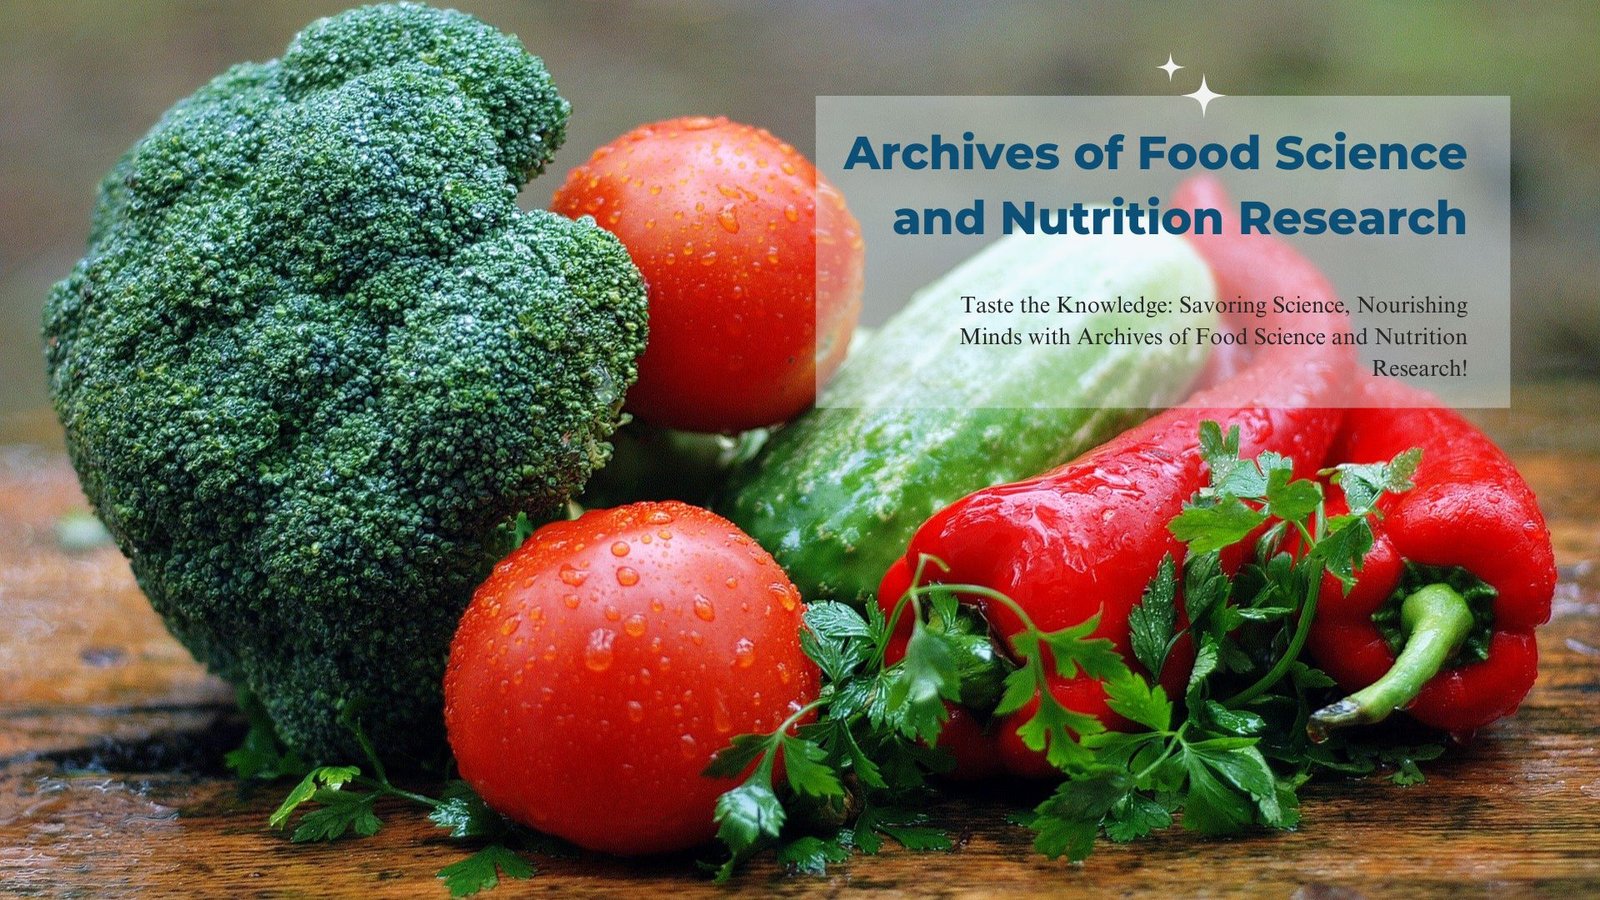 Archives of Food Science and Nutrition Research